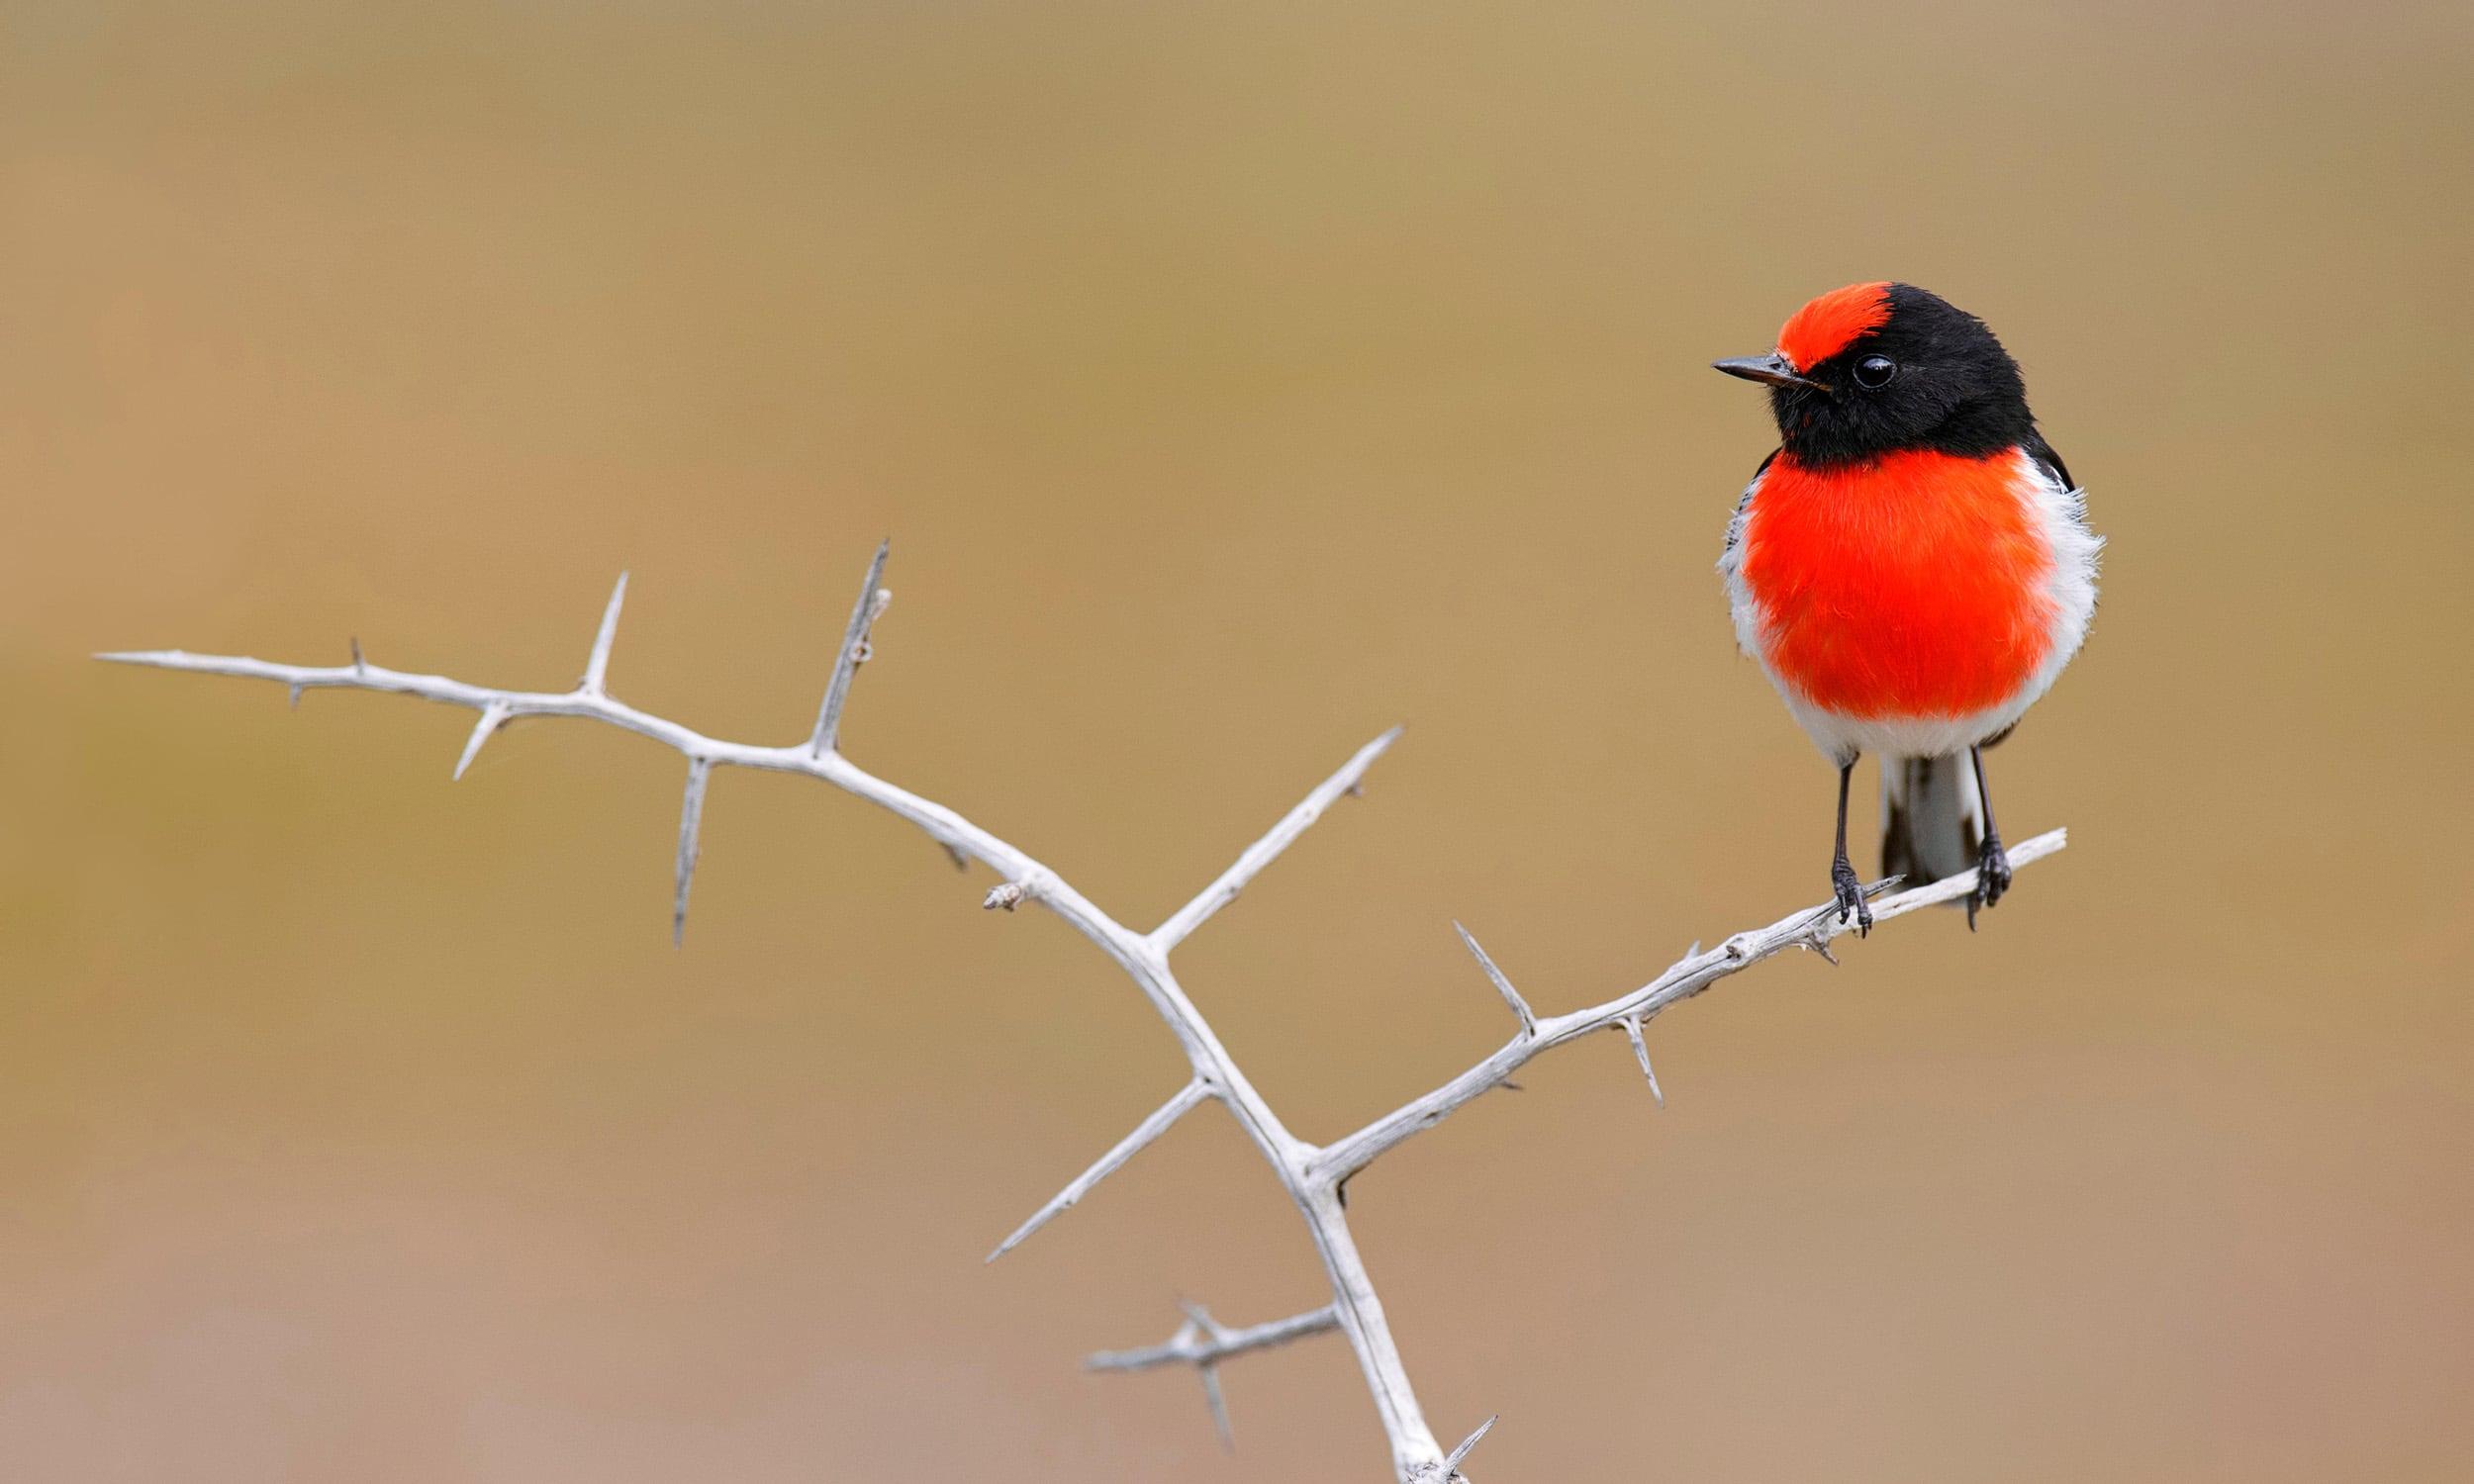 Robin redbreasts are belligerent Christmas bullies - Australian Geographic